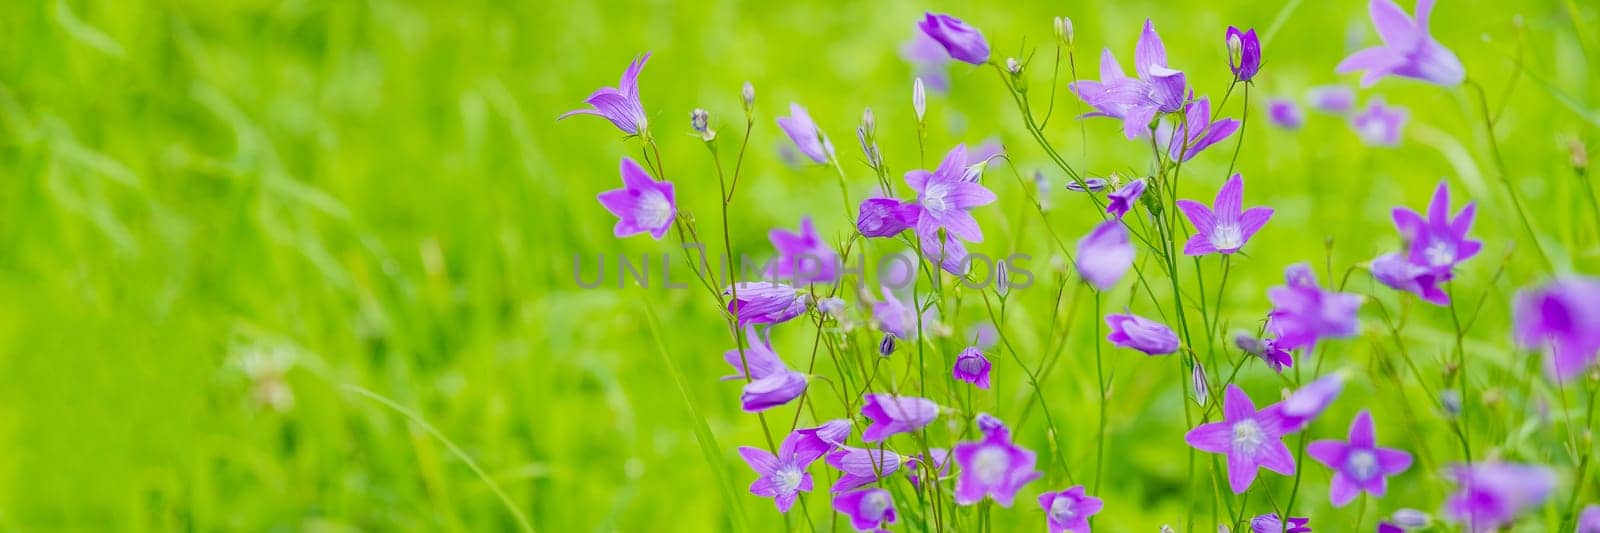 Big purple bellflower in the summer garden macro photography. Wildflowers with bright purple petals on a summer day floral poster for wall decor. Blossom campanula flower wall art poster.